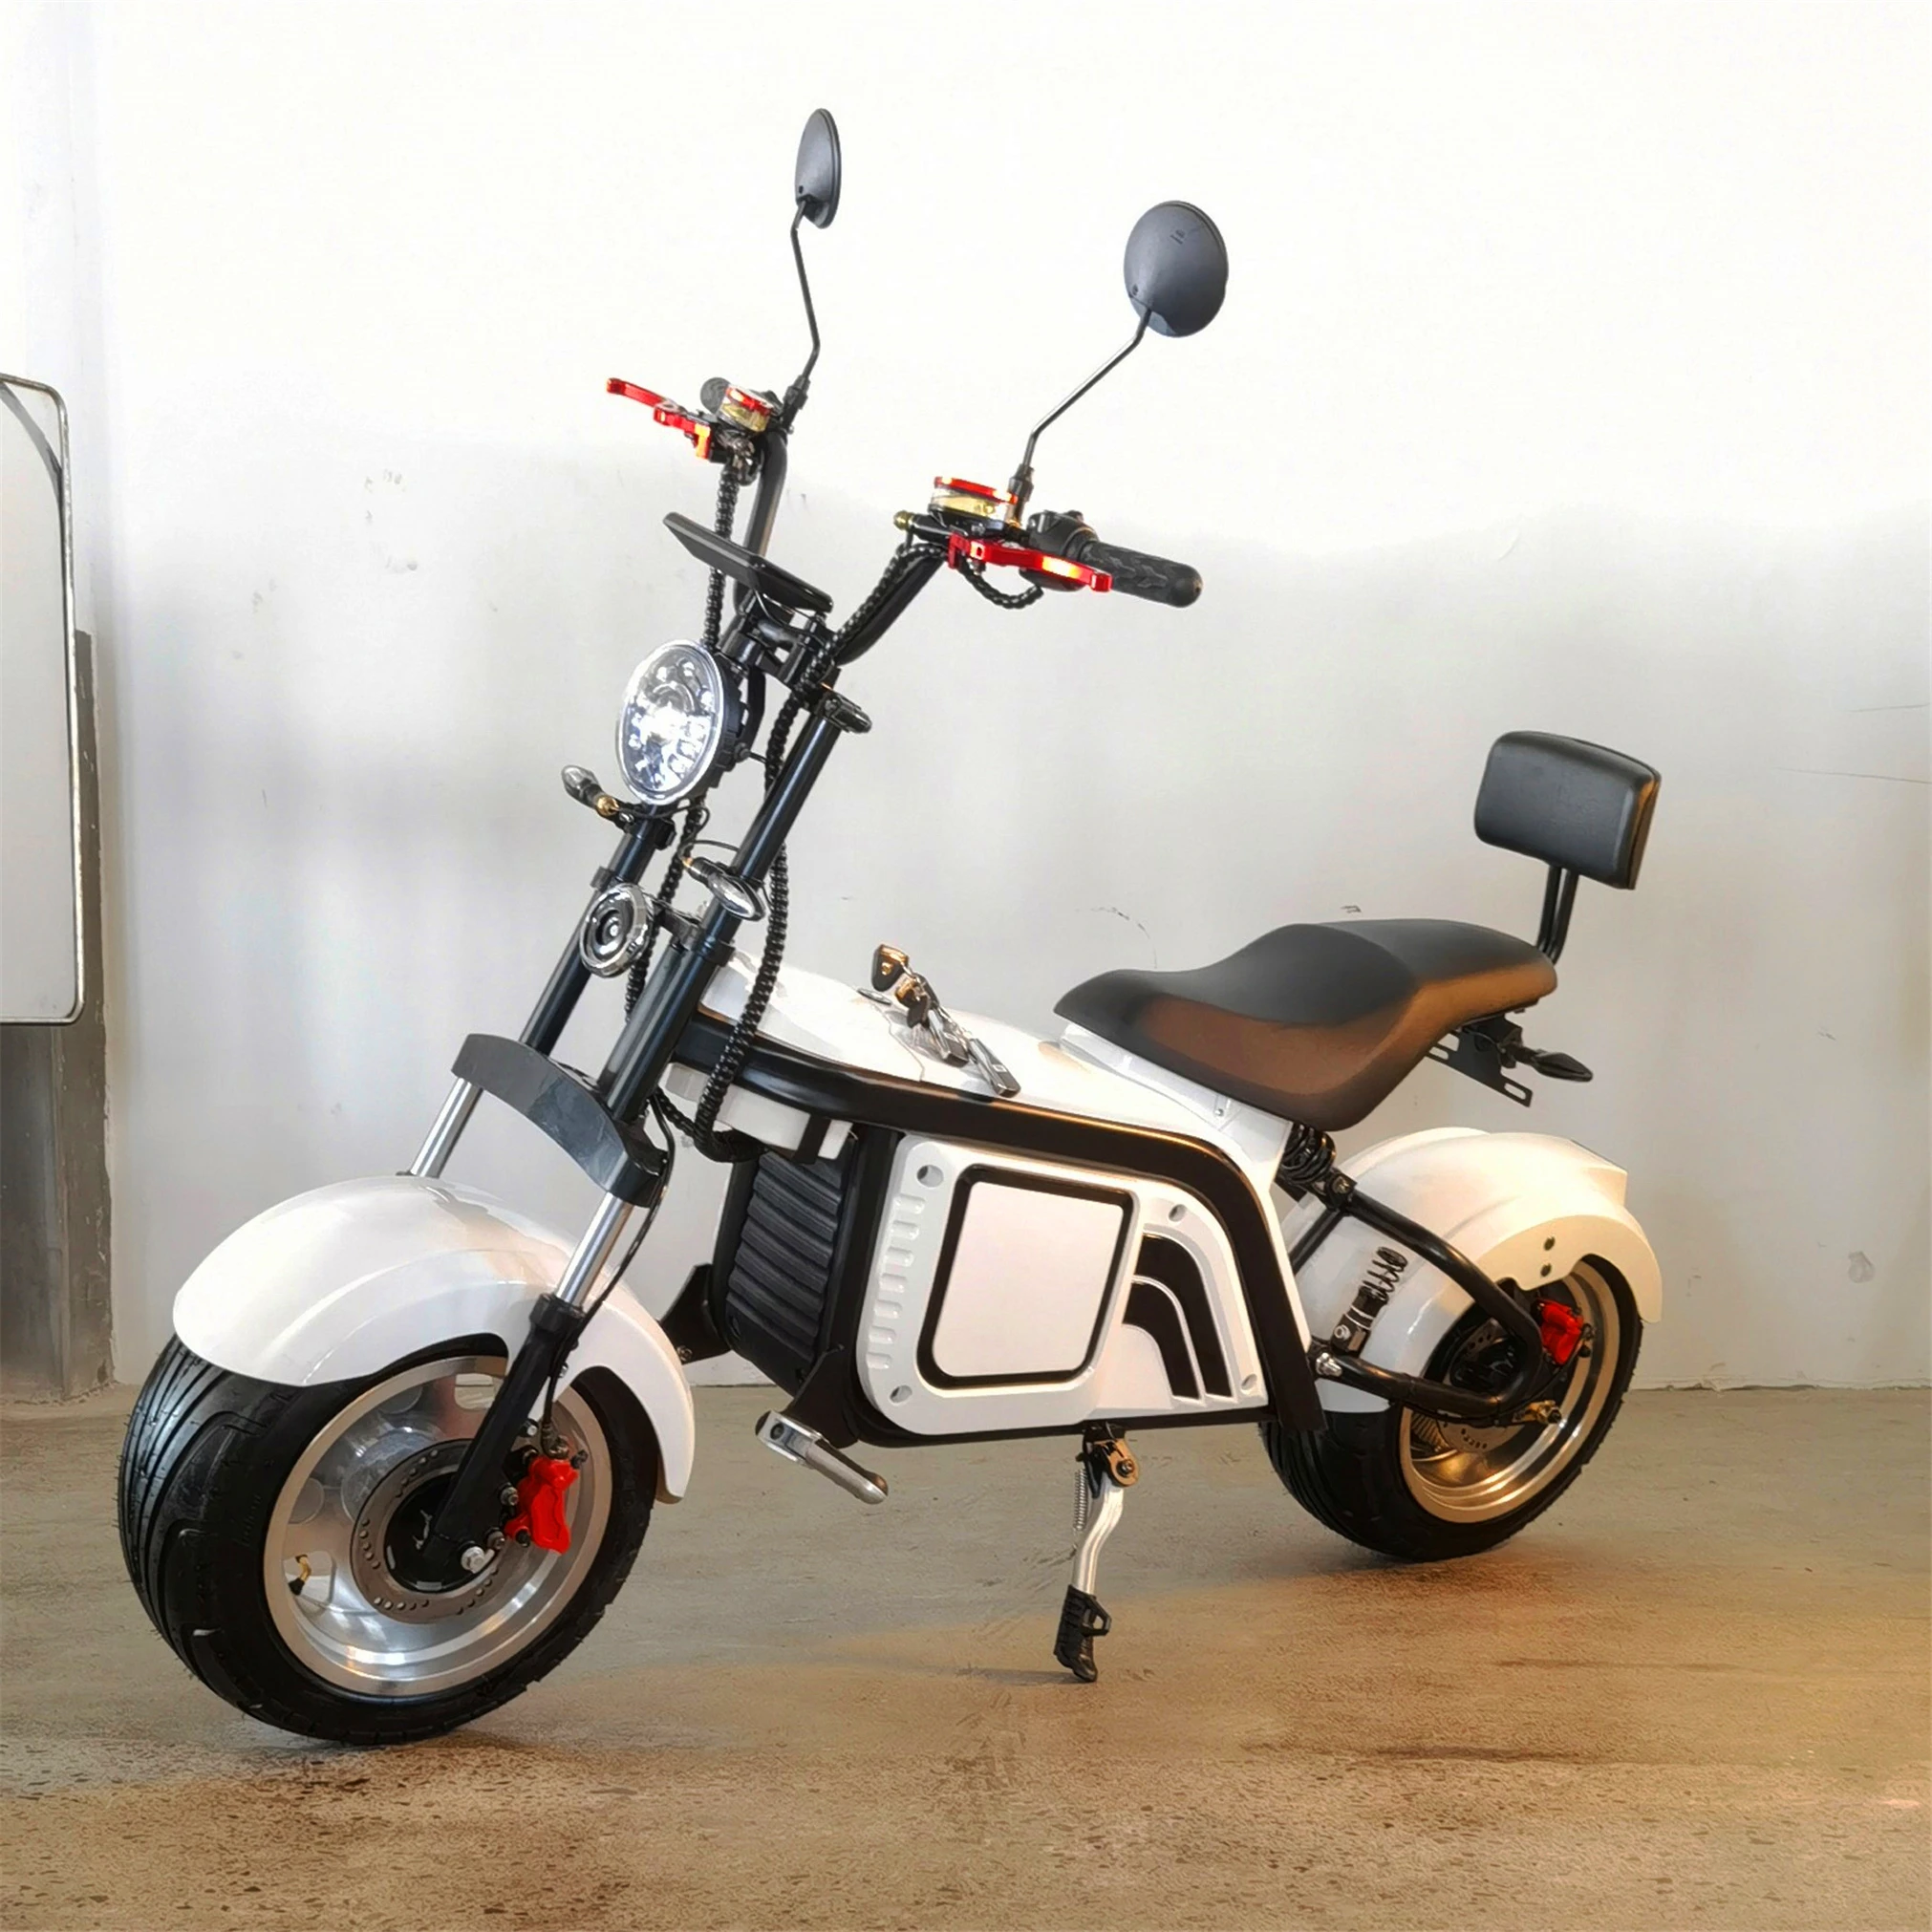 

New Model U1 Removable Battery 20AH/26AH Lithium Battery 2000W 3000W Electric Scooters For Adult Citycoco Good Chopper